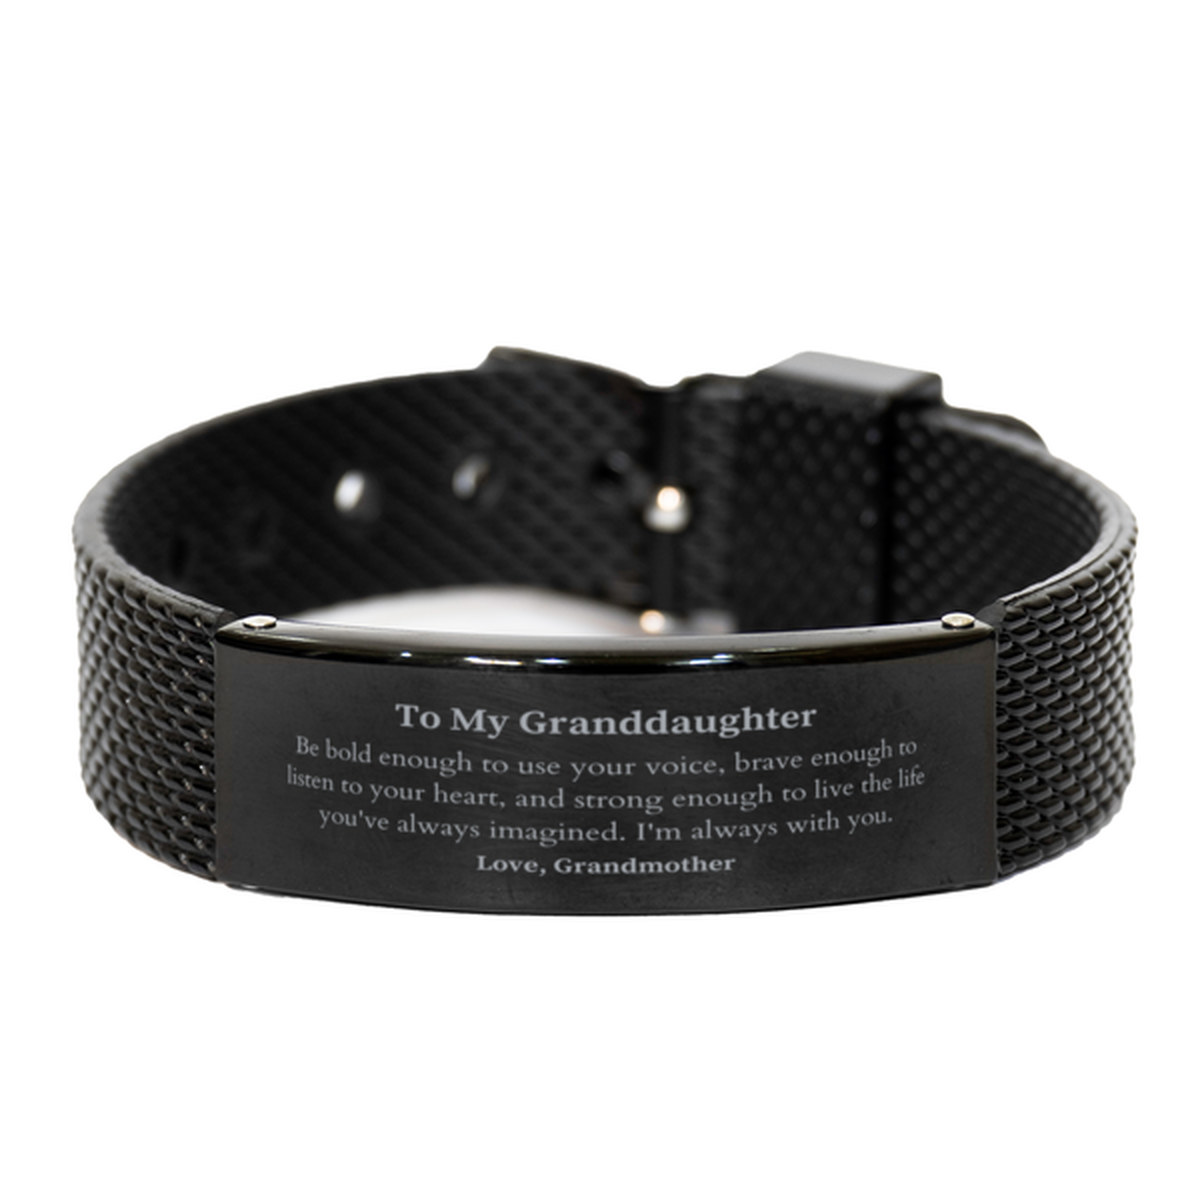 Keepsake Granddaughter Black Shark Mesh Bracelet Gift Idea Graduation Christmas Birthday Granddaughter from Grandmother, Granddaughter Be bold enough to use your voice, brave enough to listen to your heart. Love, Grandmother